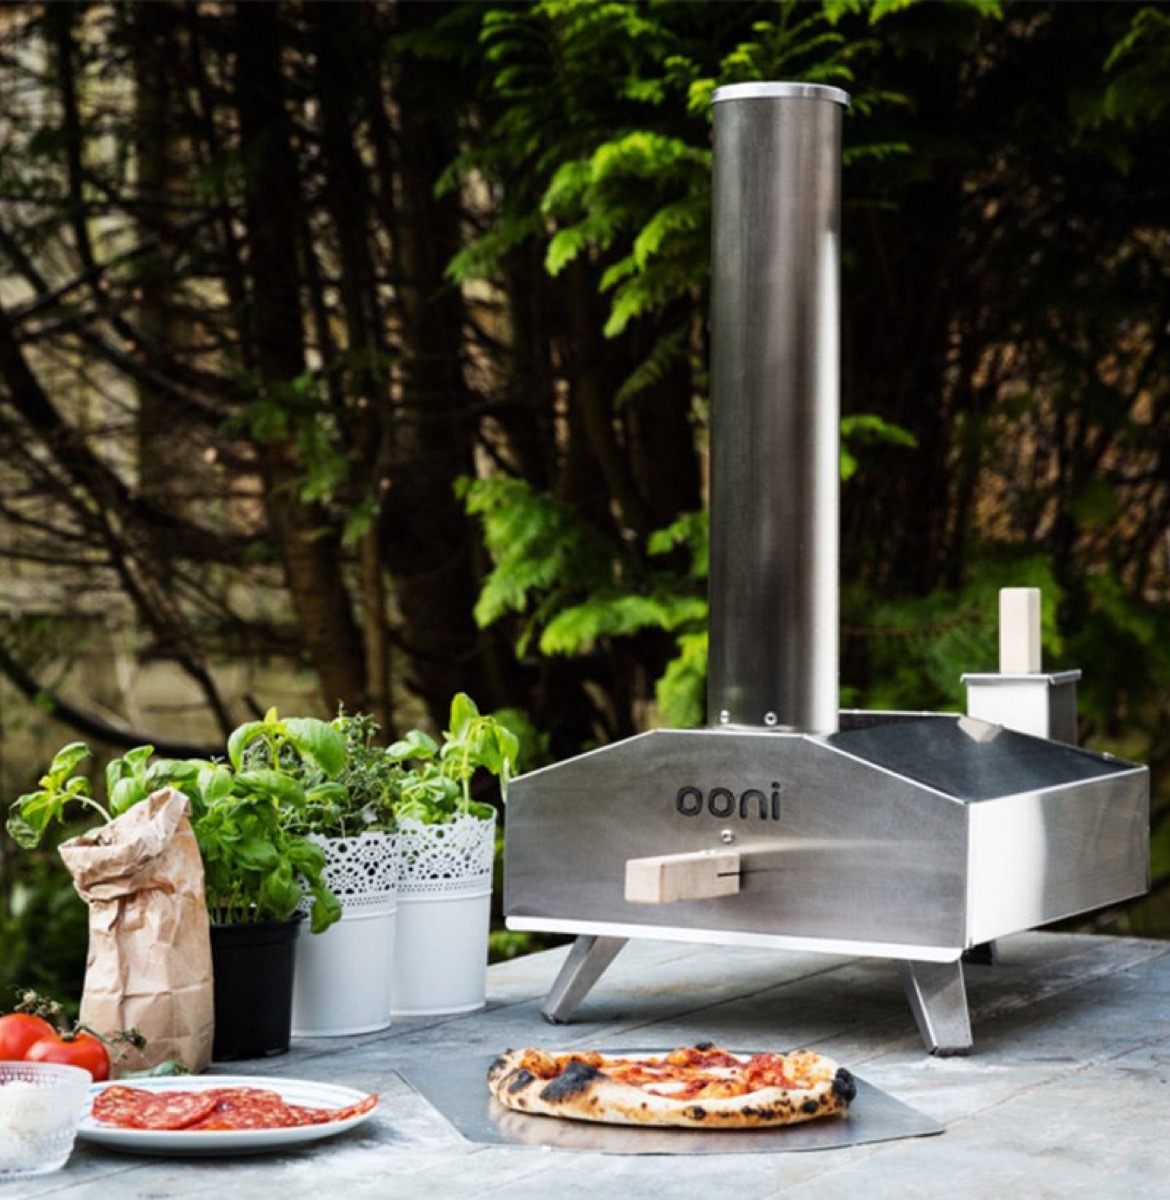 Ooni 3 piizza oven with pizza